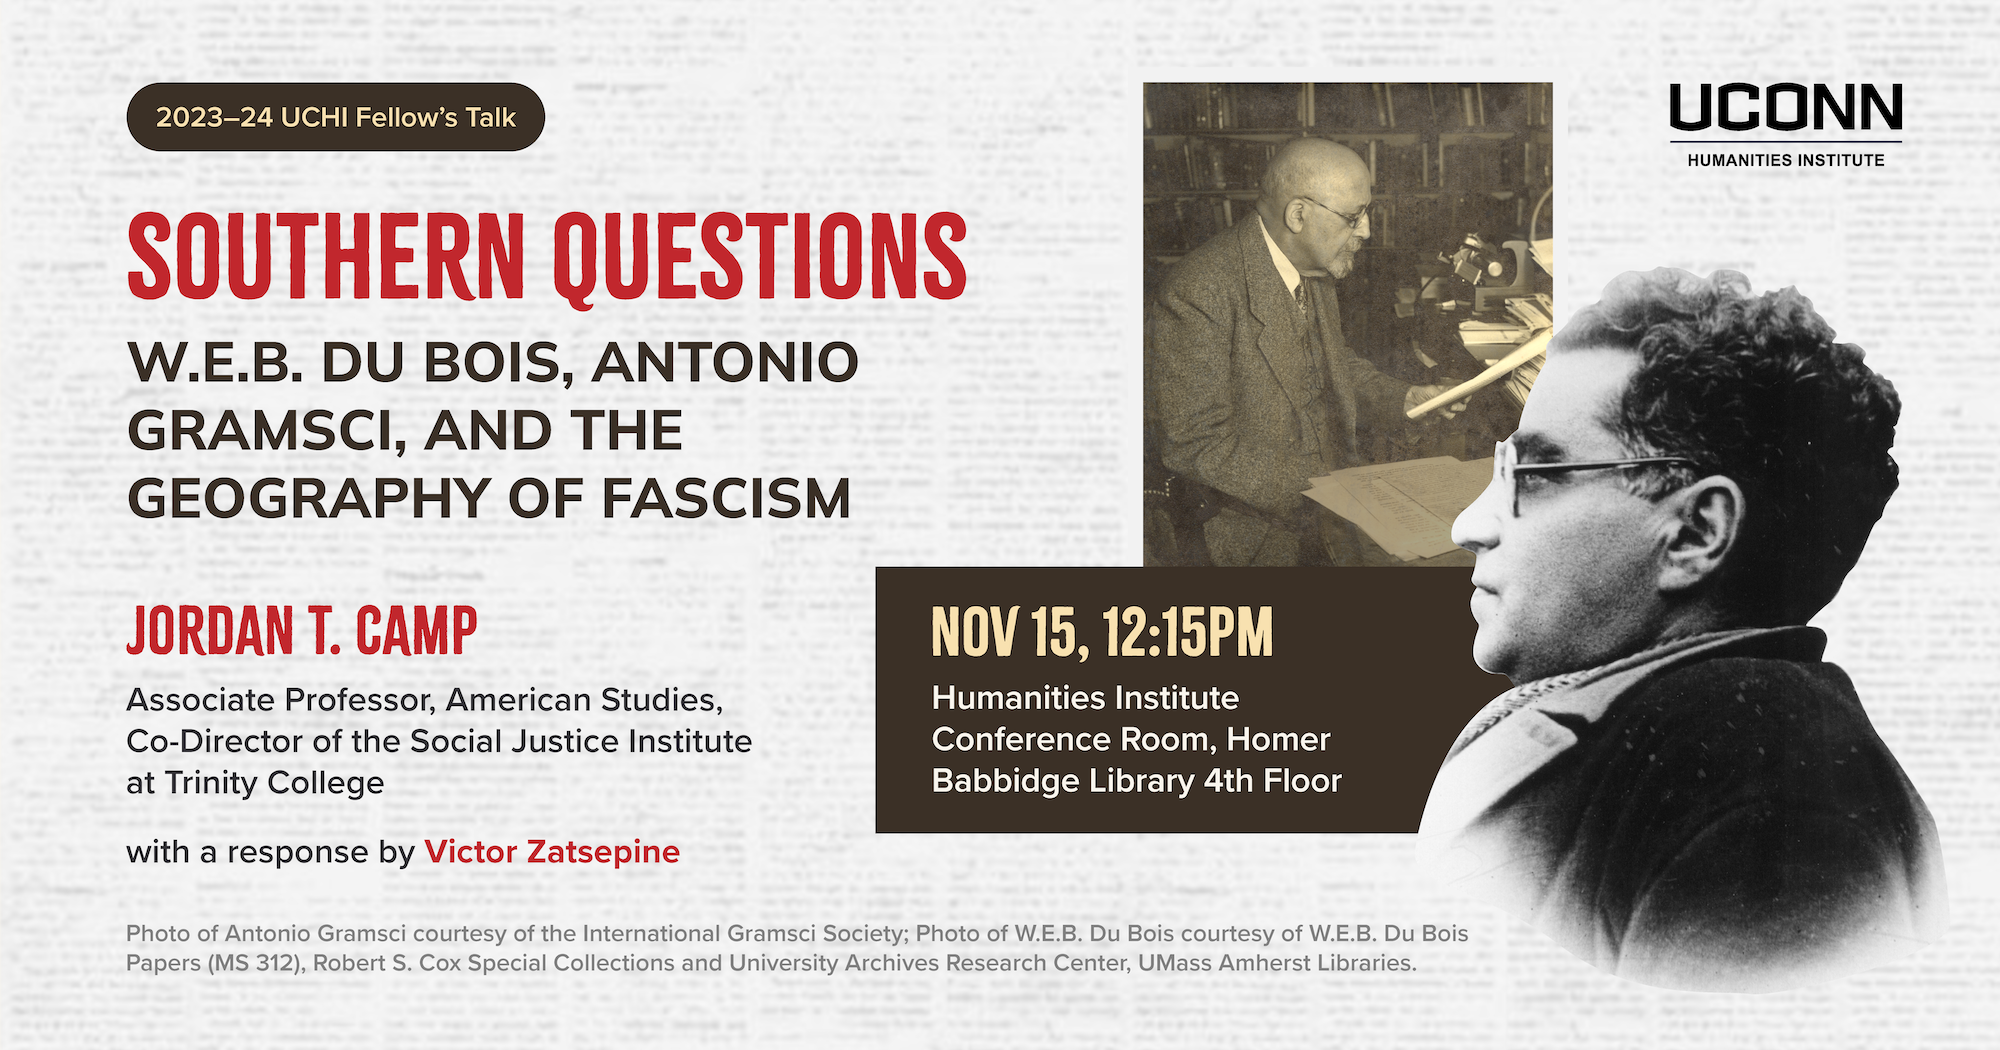 Southern Questions: W.E.B. Du Bois, Antonio Gramsci, and the Geography of Fascism. Jordan Camp, Associate Professor of American Studies, Trinity College. With a response by Victor Zatsepine.